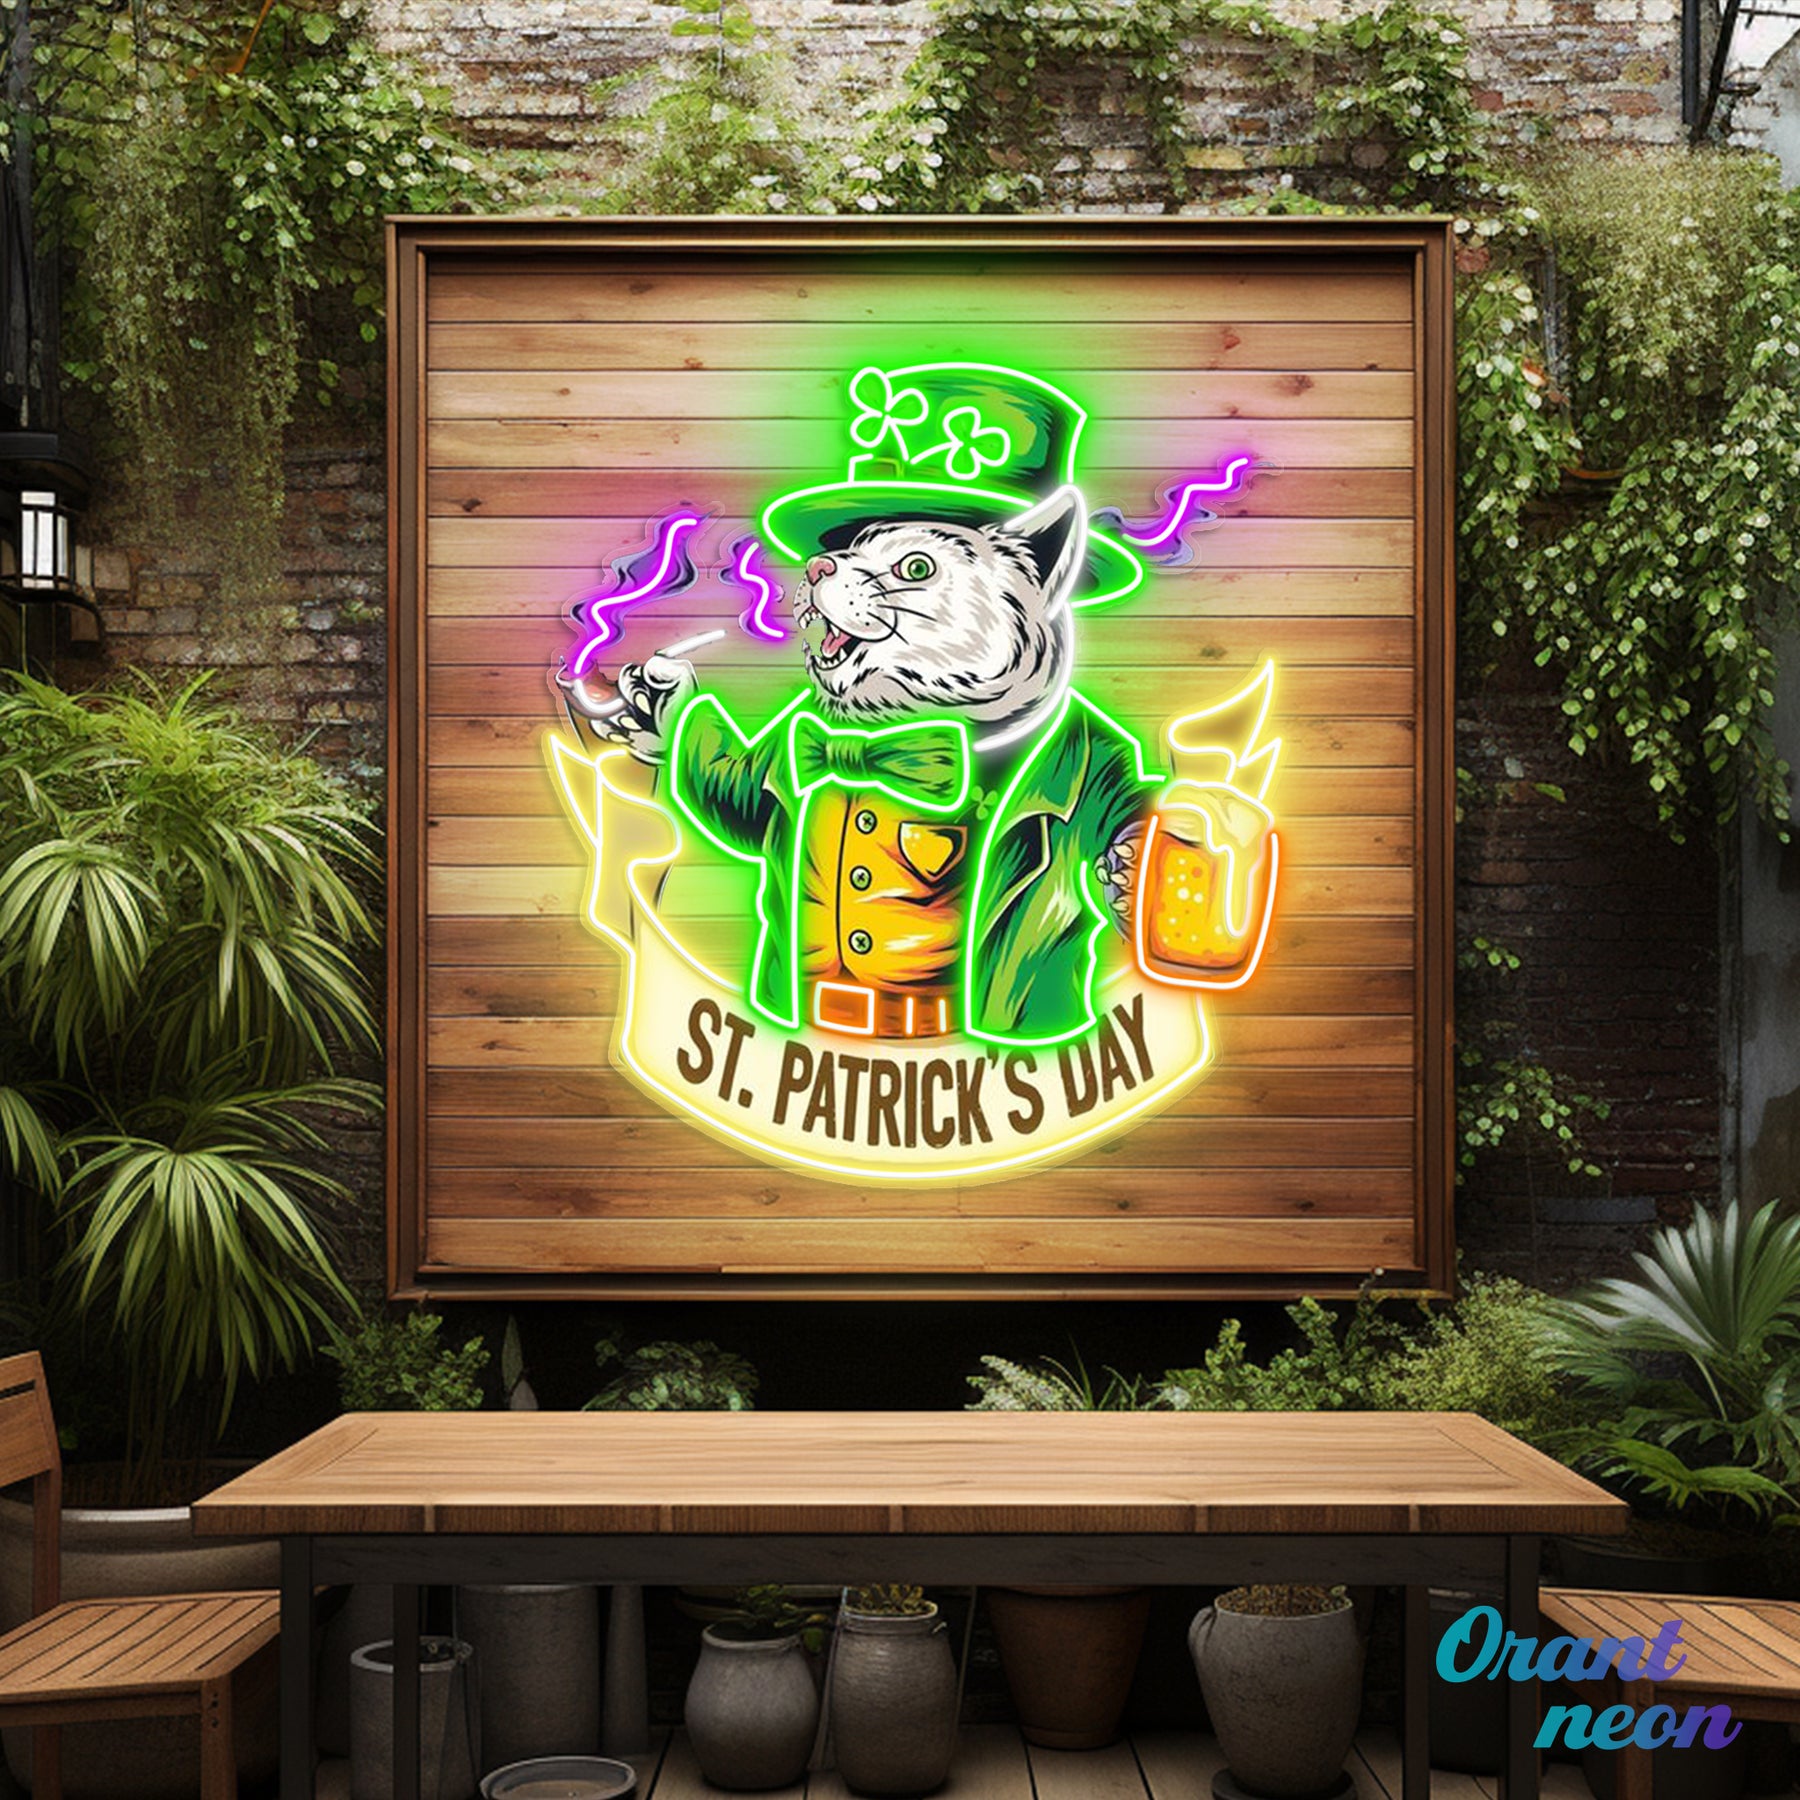 Patrick's Day Mouse Holding Beer And Cigarette Led Neon Acrylic Artwork